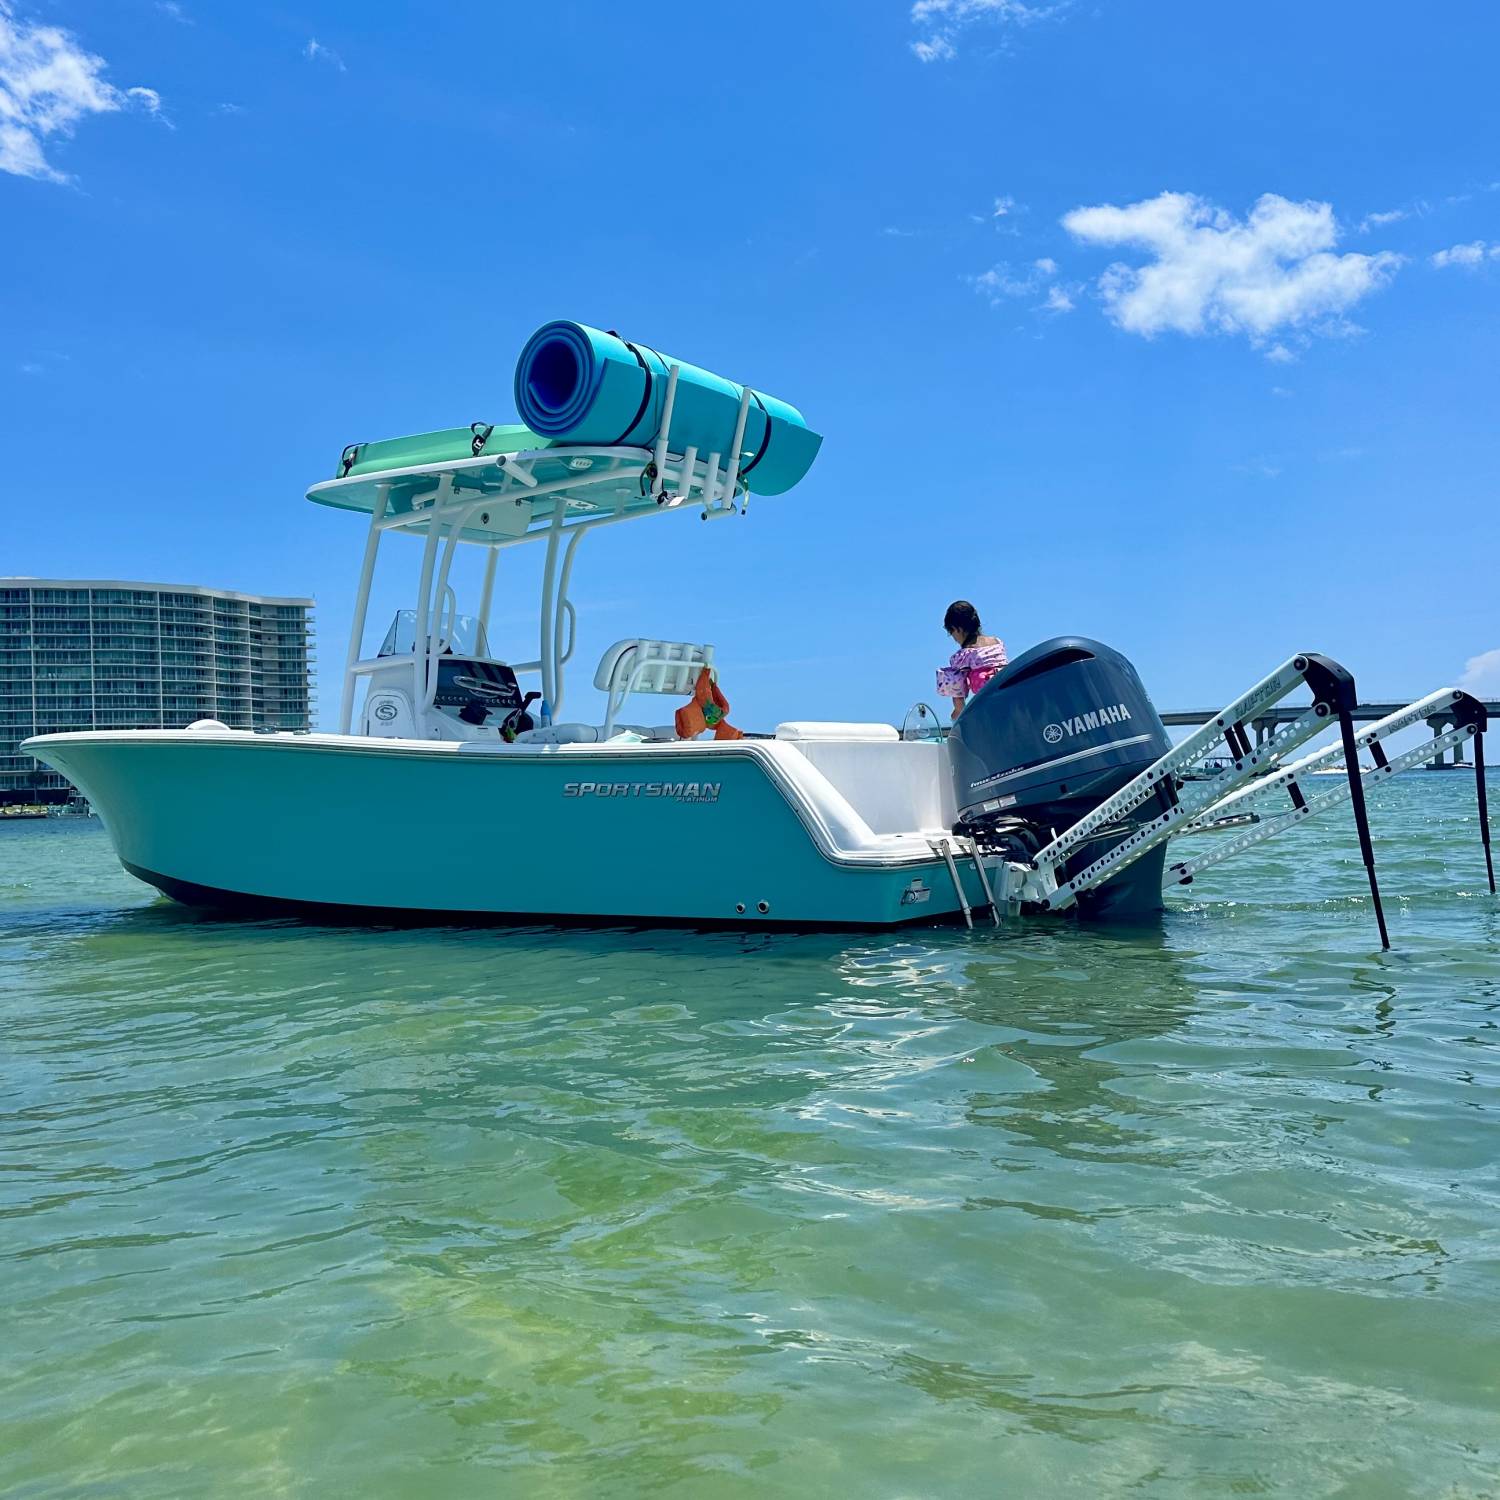 Title: 2023 Sportsman 232 Platinum - On board their Sportsman Open 232 Center Console - Location: Orange Beach, Alabama. Participating in the Photo Contest #SportsmanJuly2024